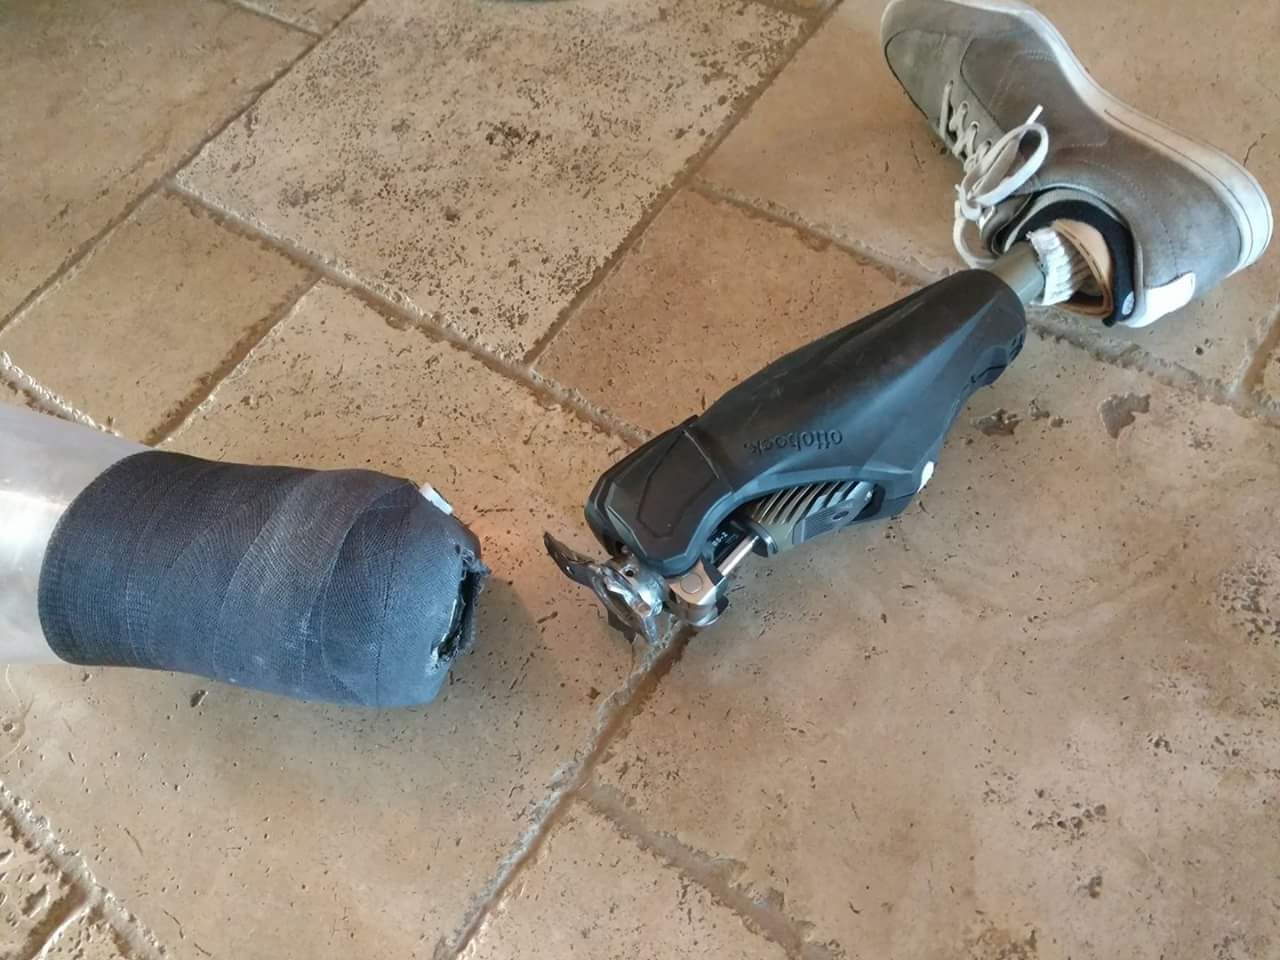 My uncle broke his leg today. He said it didn't even hurt.